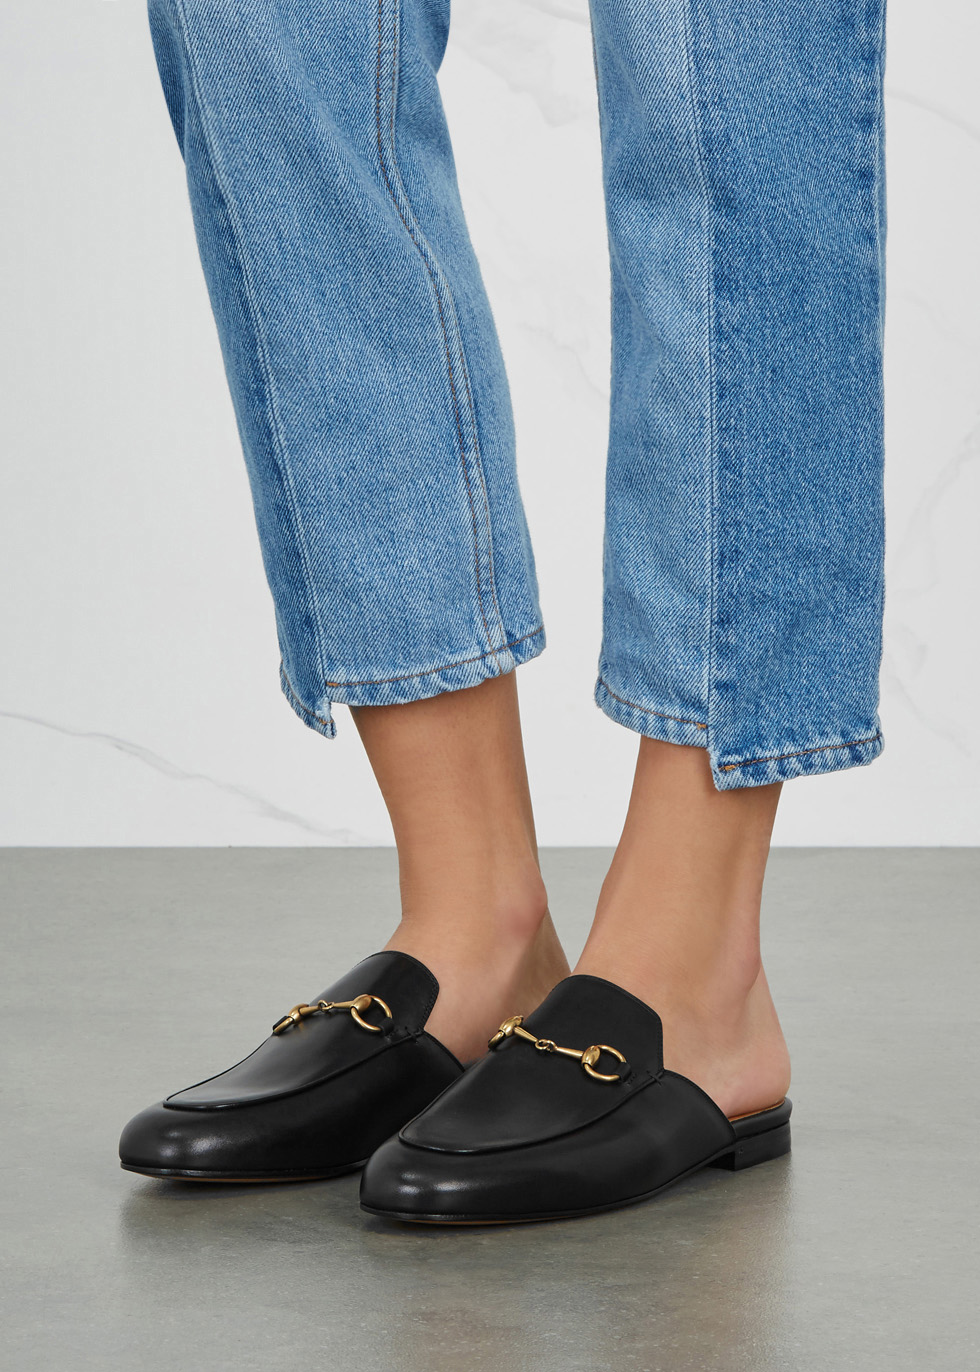 black loafers gucci